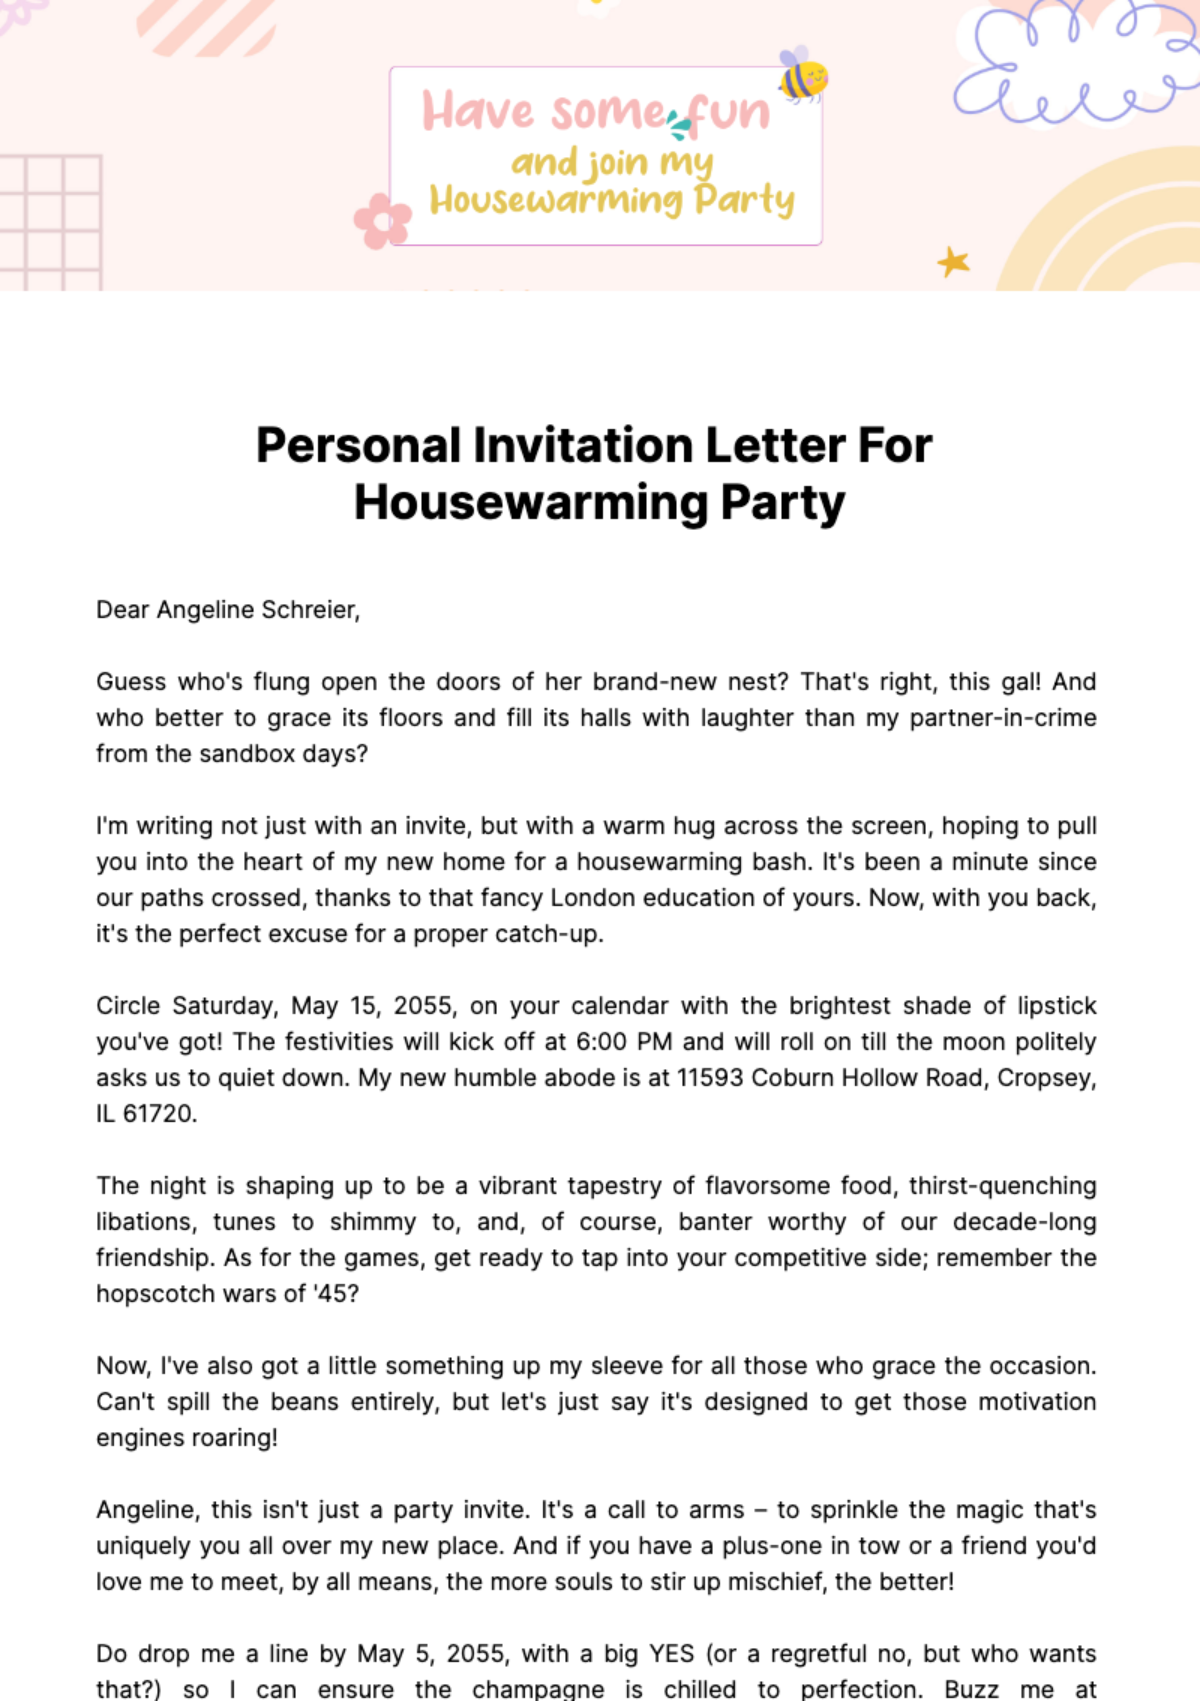 Personal Invitation Letter for Housewarming Party  Template